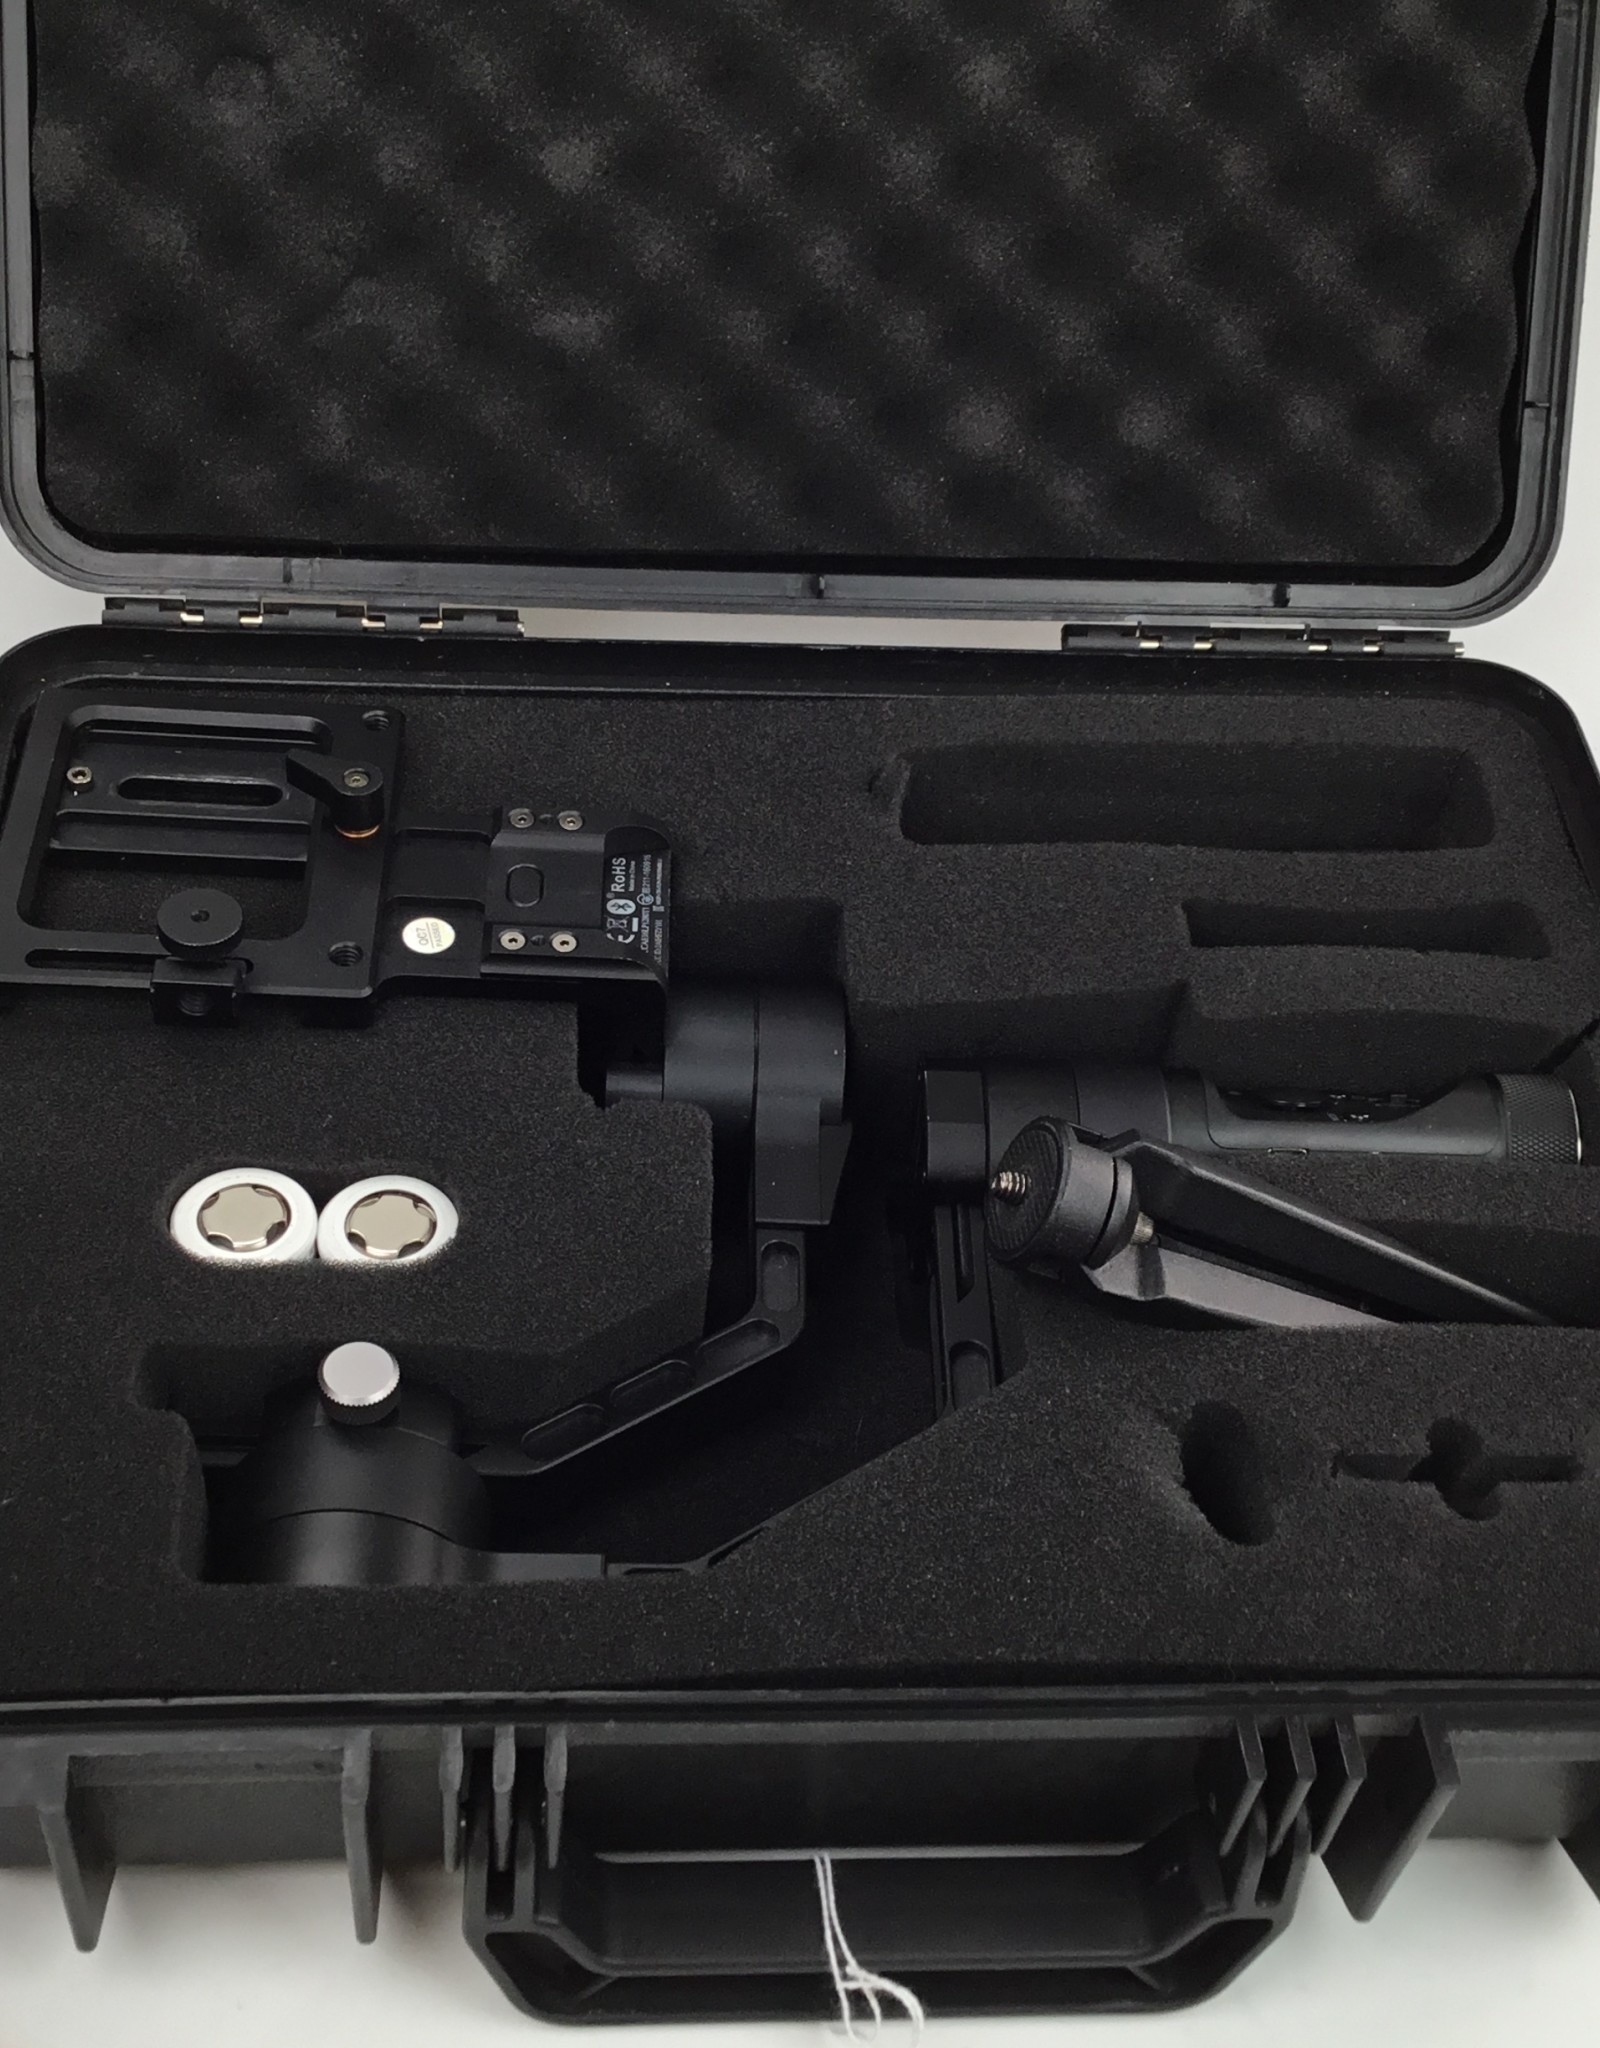 Zhiyun Crane Gimbal Stabilizer NO Charger  in Case Used Good